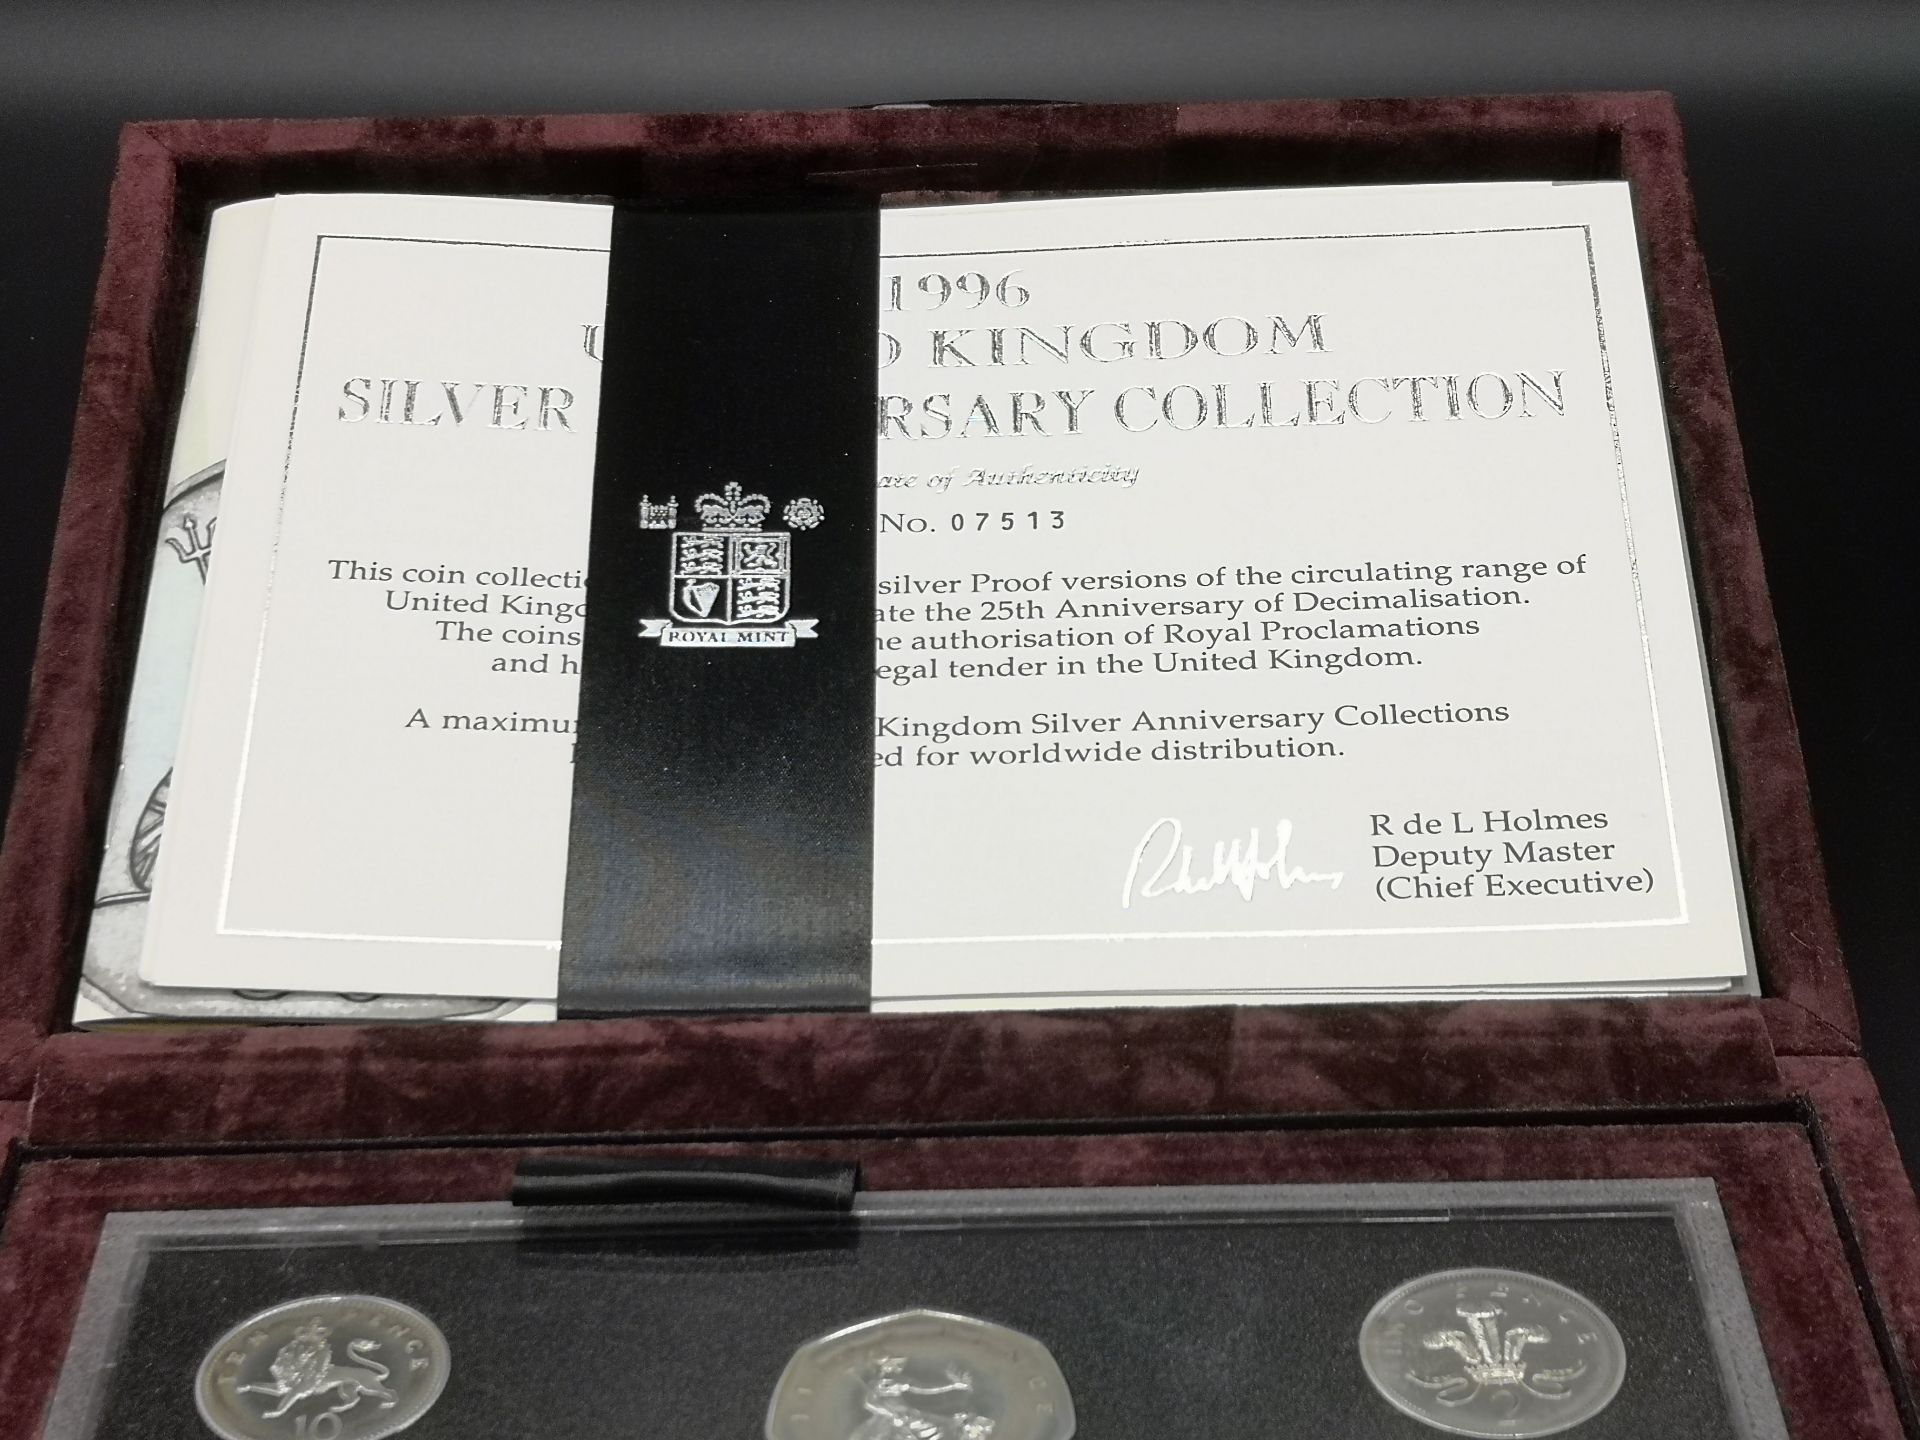 Elizabeth II Royal Mint silver Proof anniversary collection, 1996 - Image 6 of 6